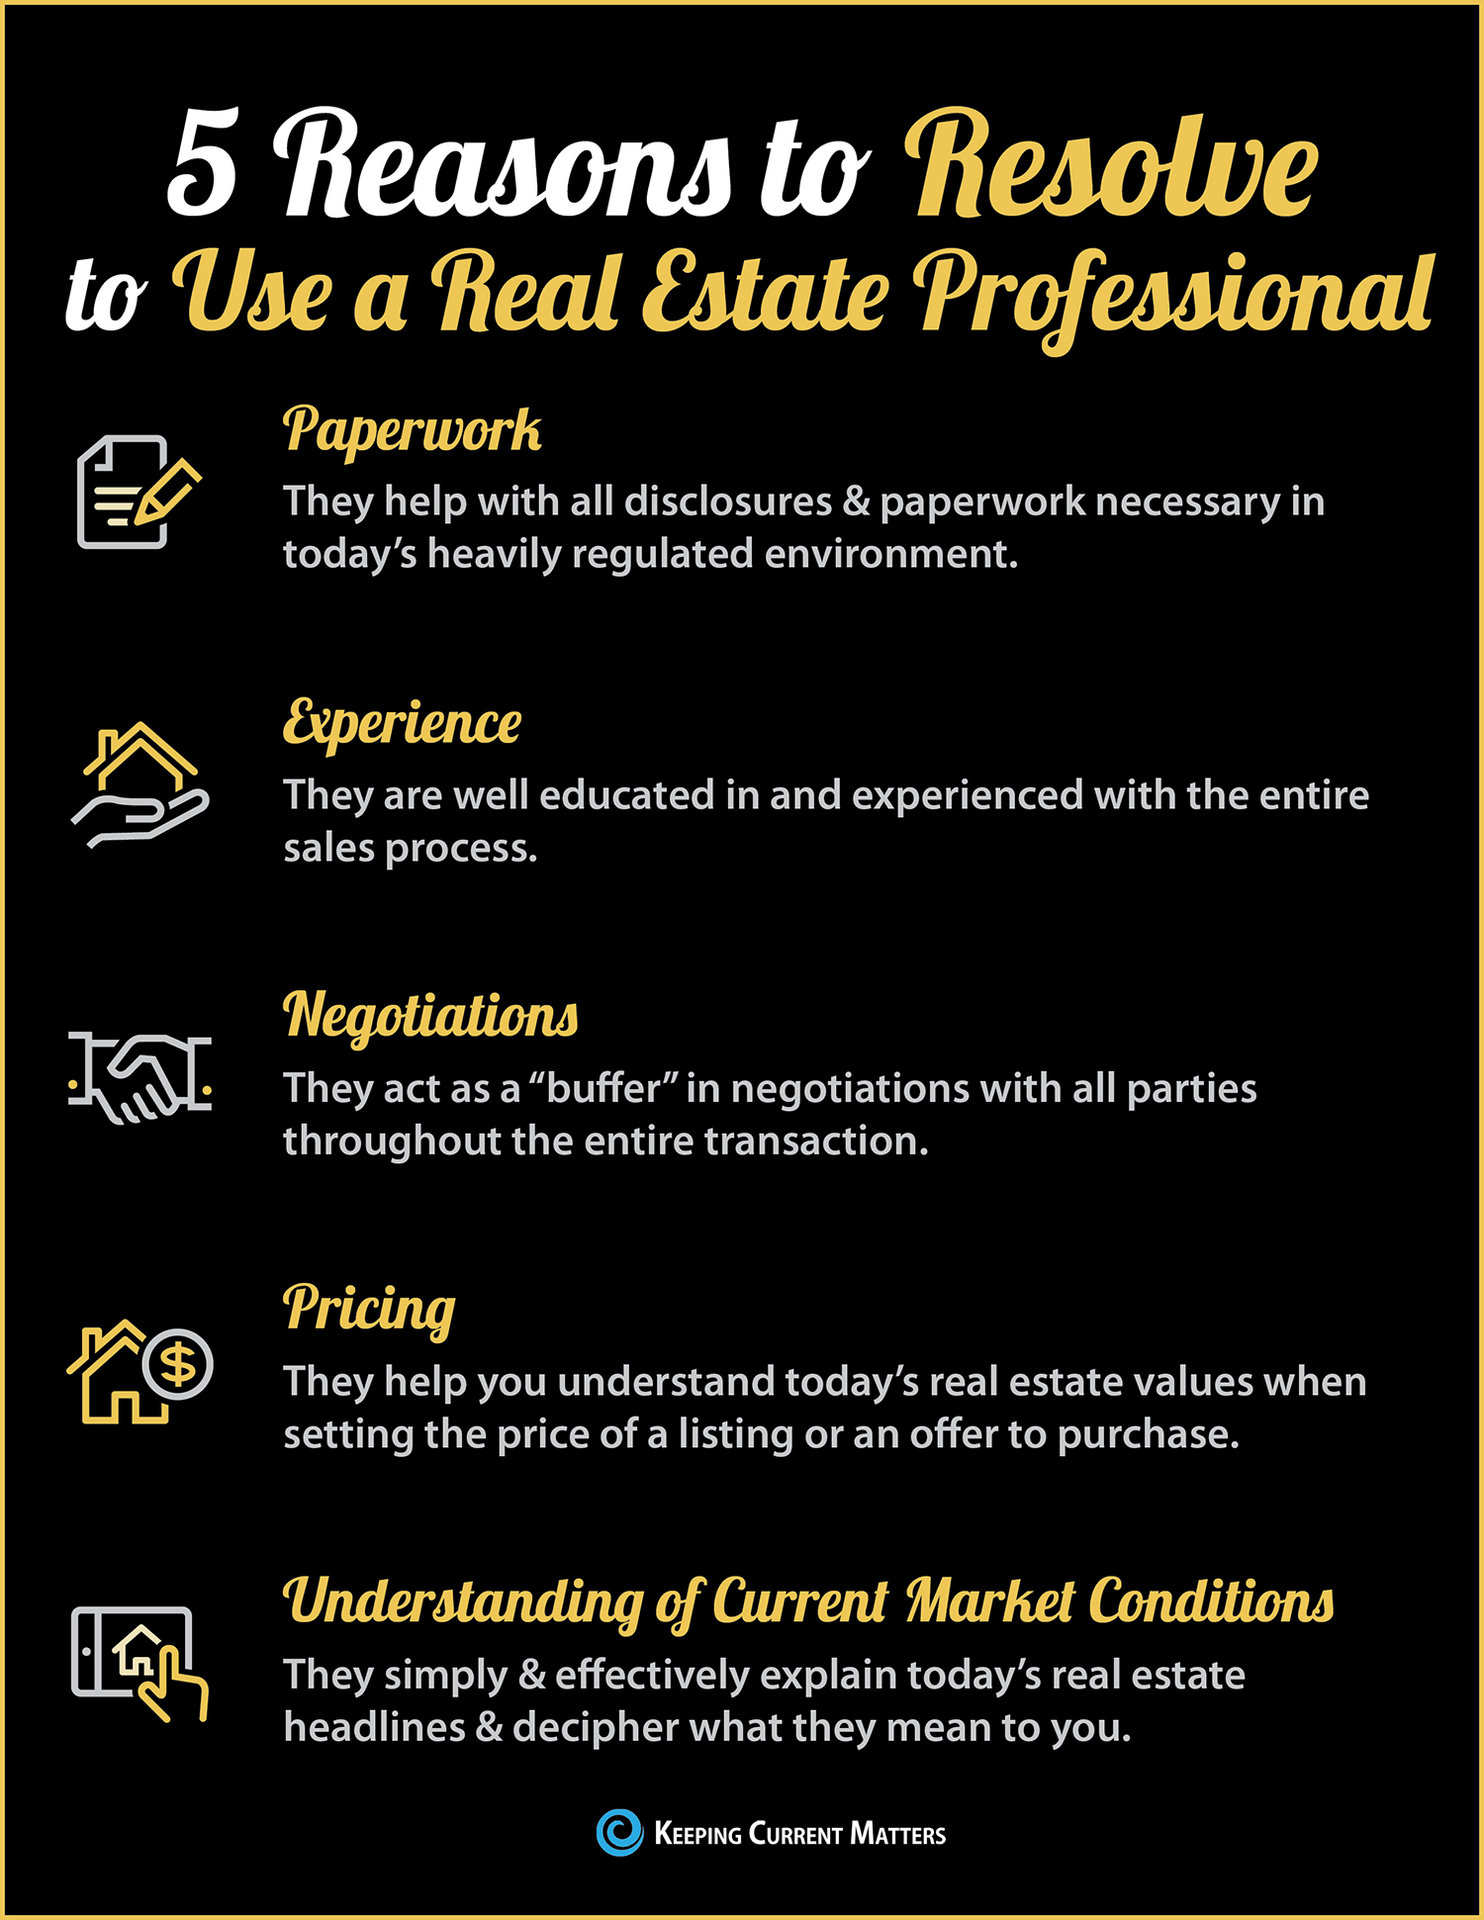 5 Reasons to Resolve to Hire a Real Estate Professional [INFOGRAPHIC] | Keeping Current Matters